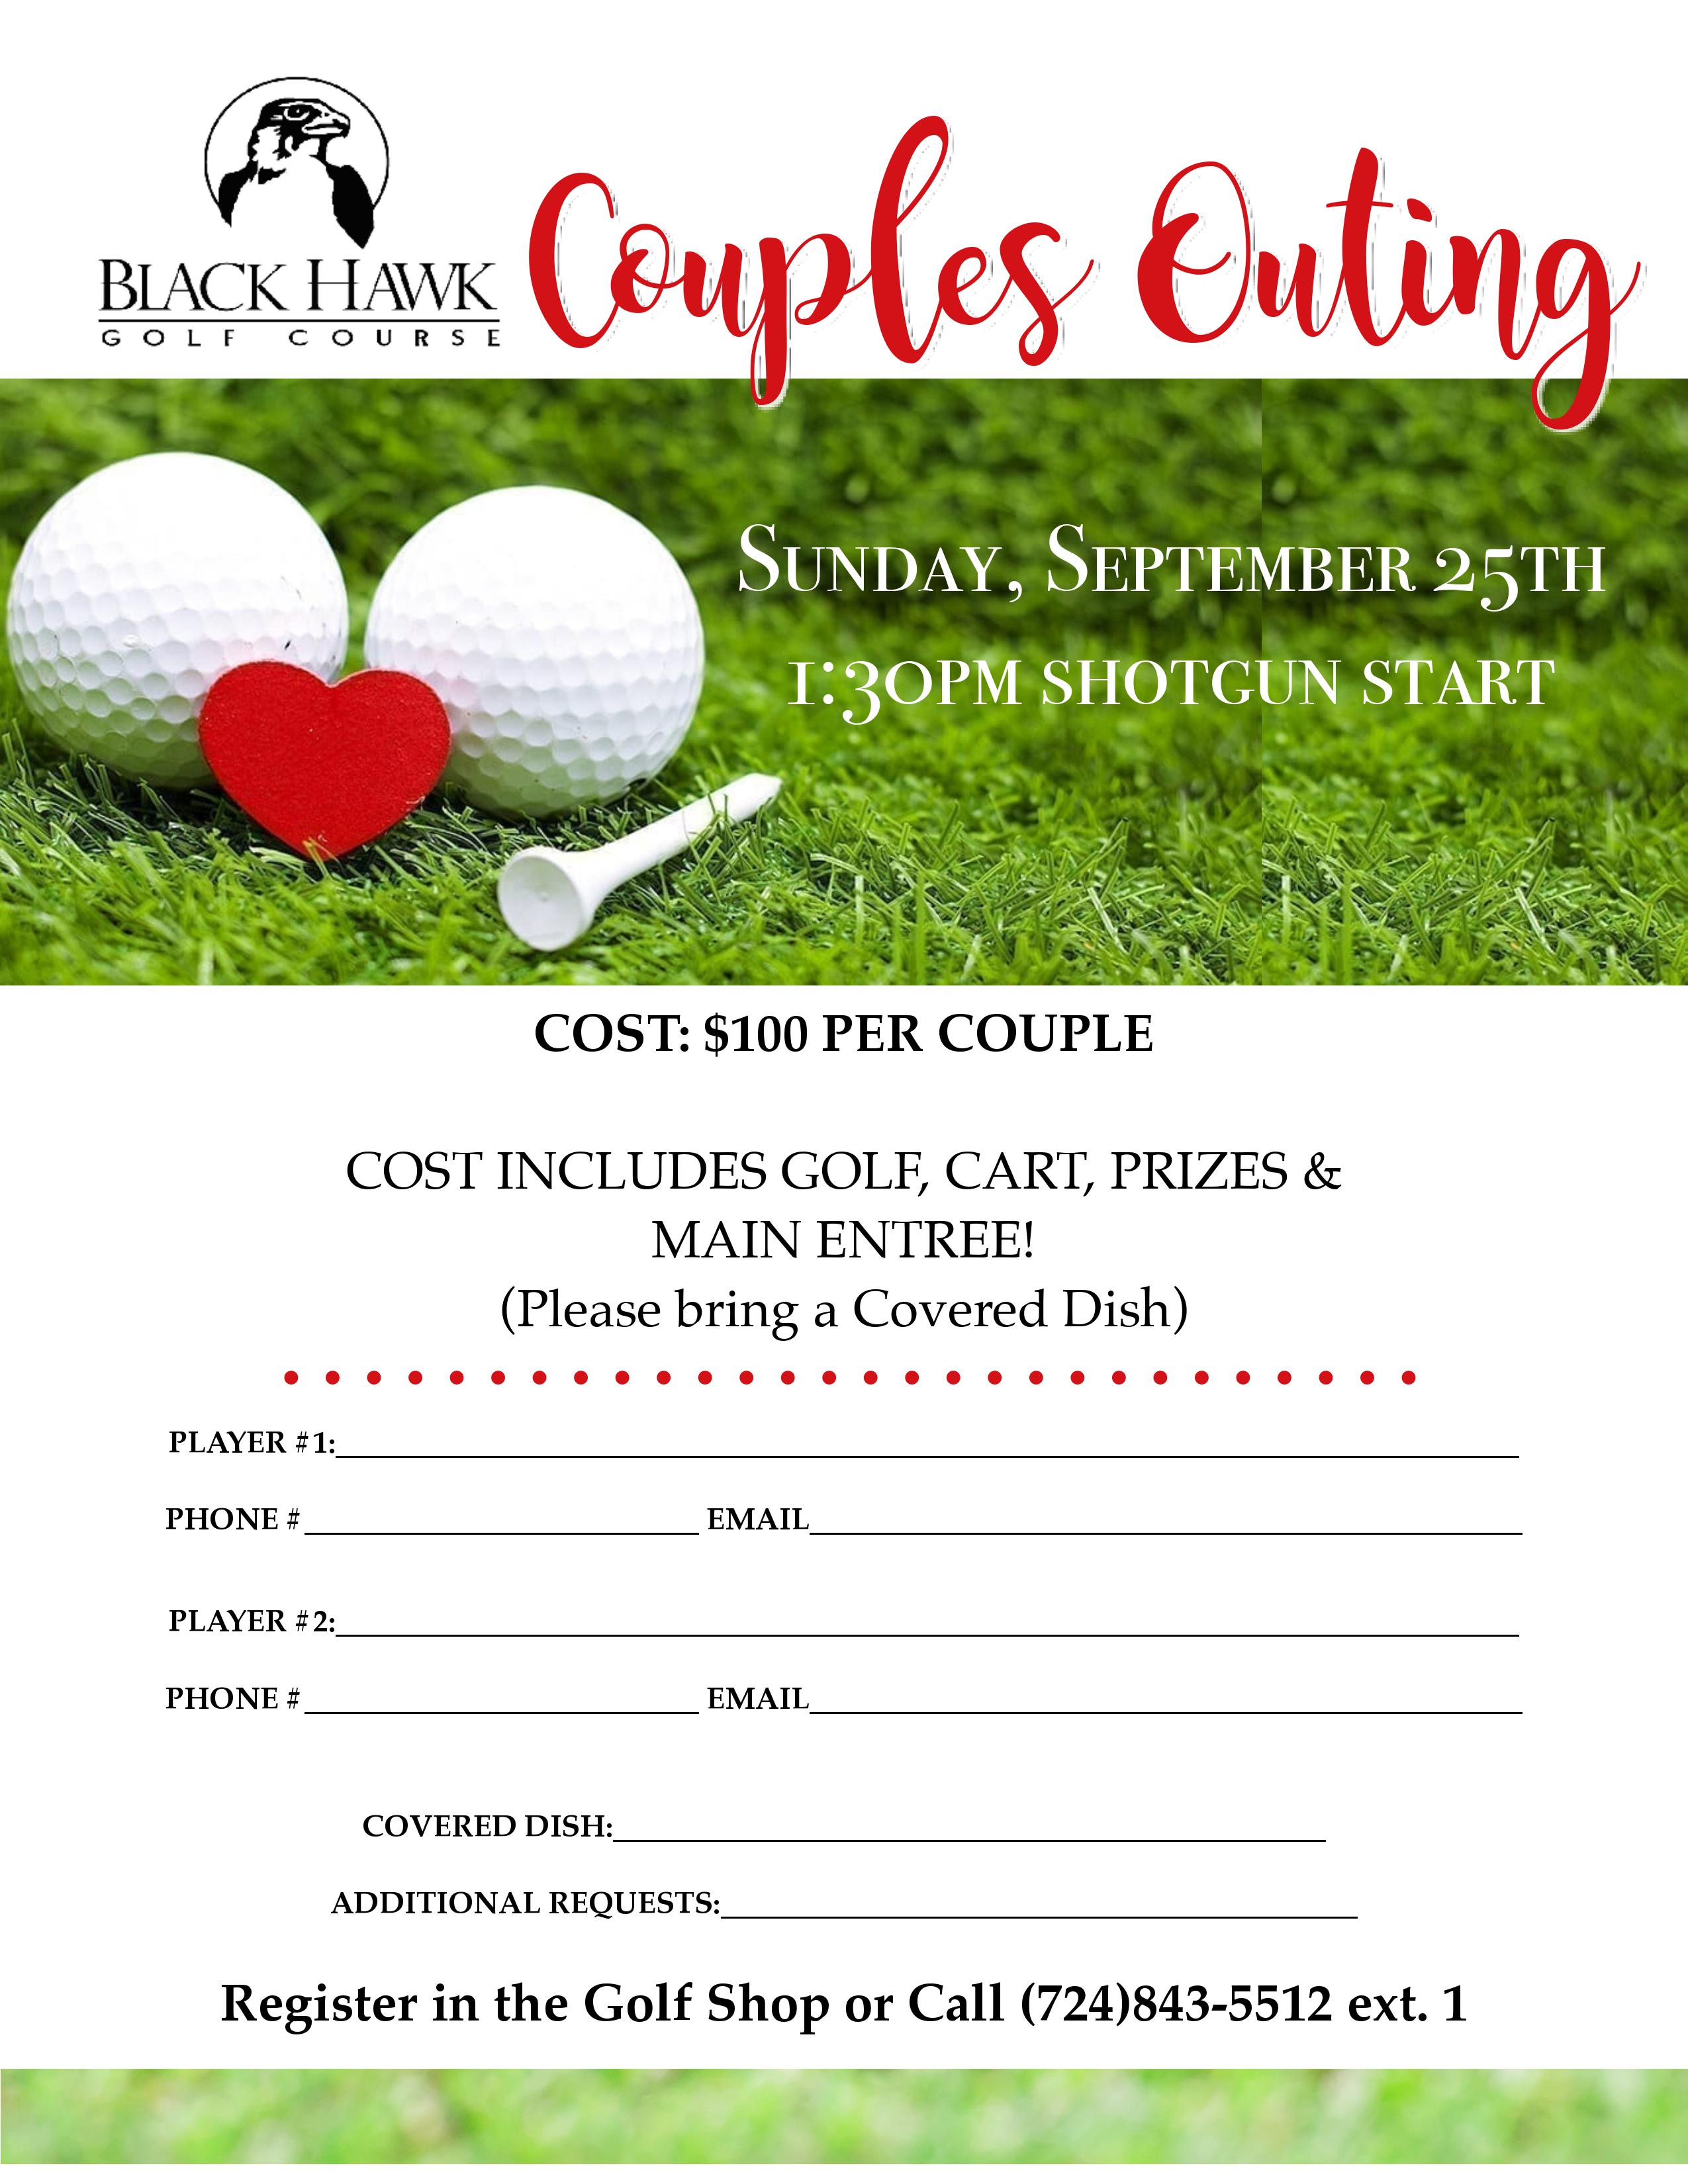 Black Hawk Golf Couples Outing 